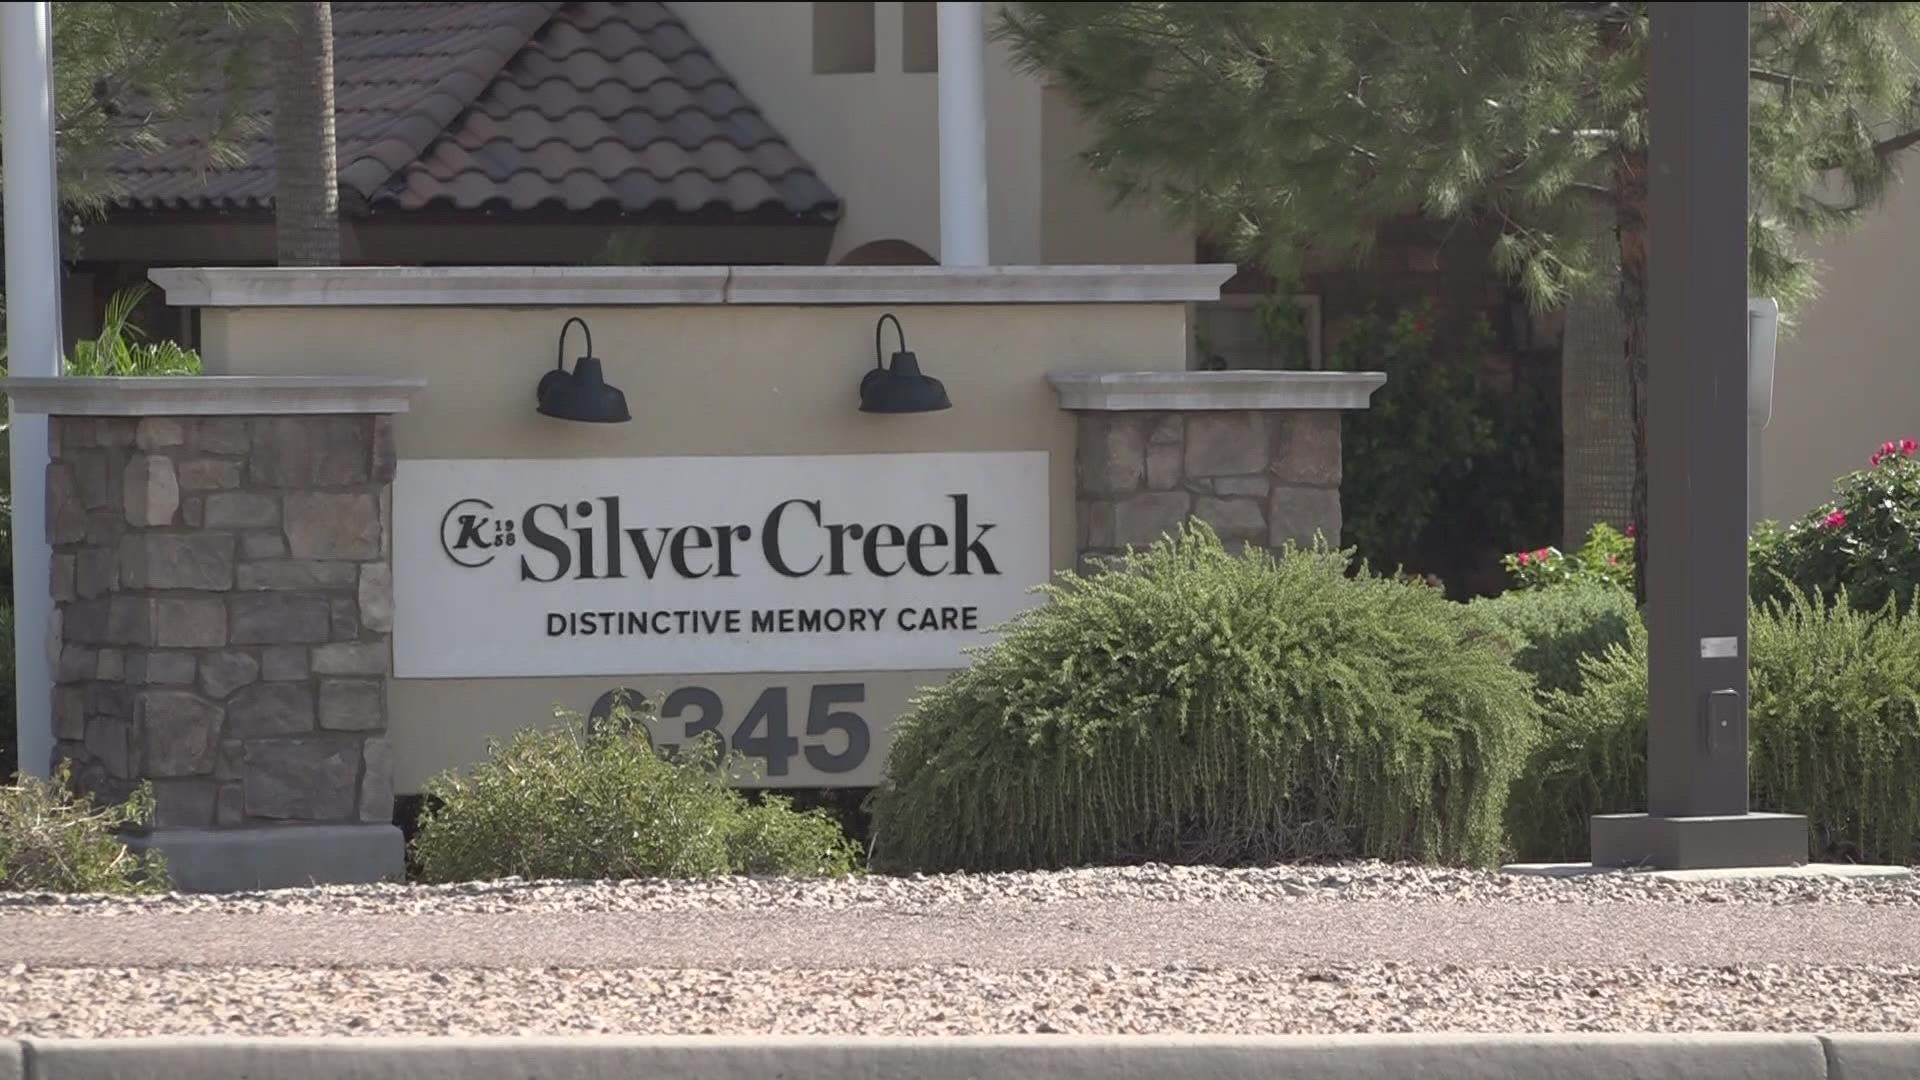 A 79-year-old woman was found deceased Monday afternoon after she allegedly walked out of a memory care facility in the East Valley.